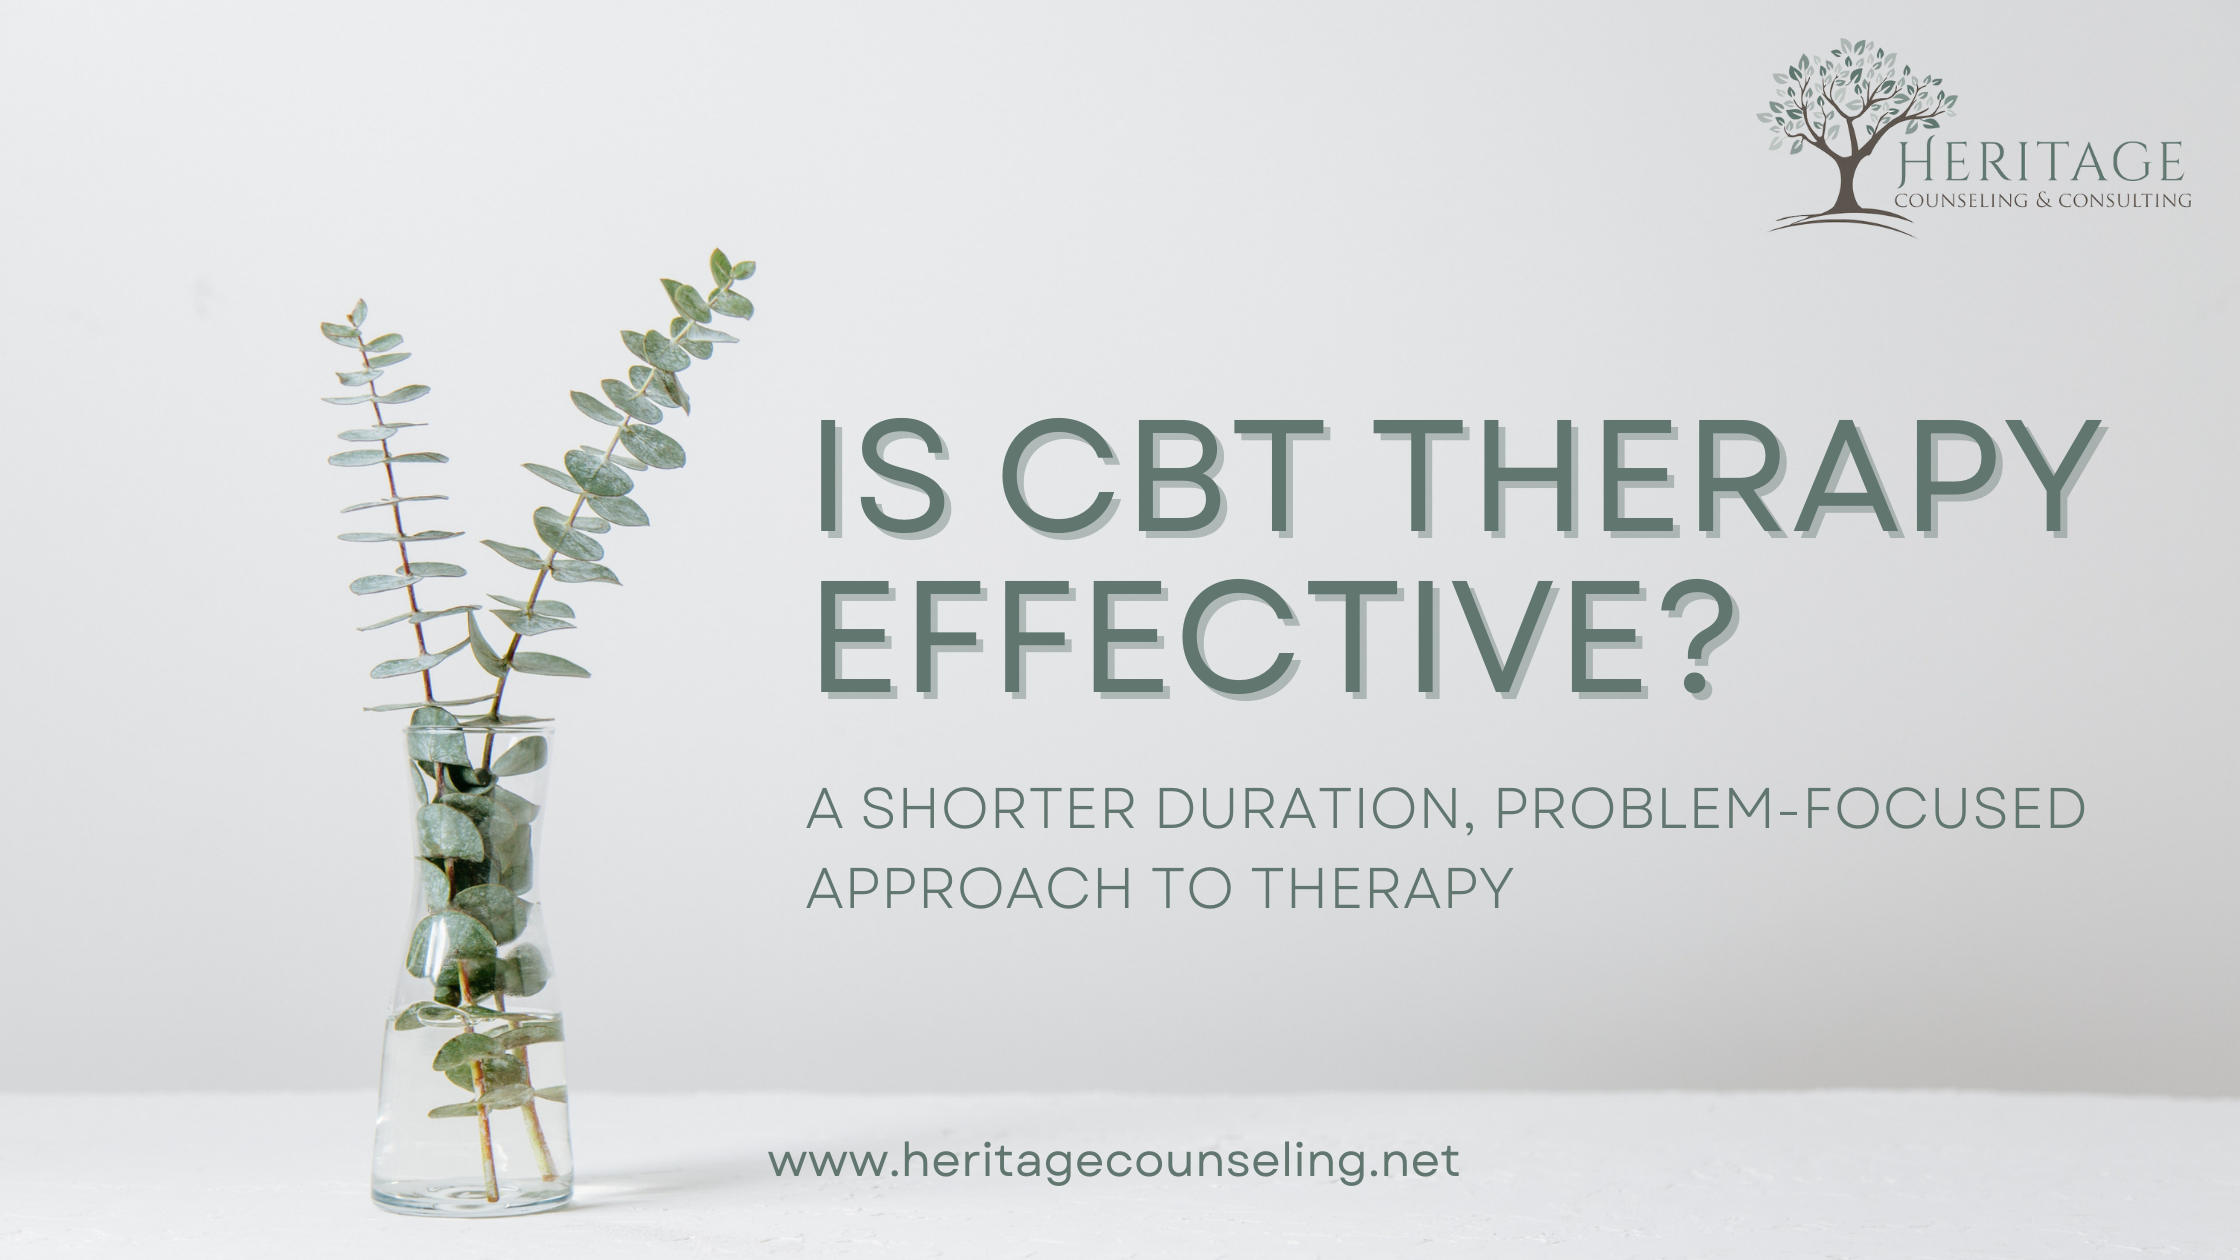 Is CBT Therapy Effective?